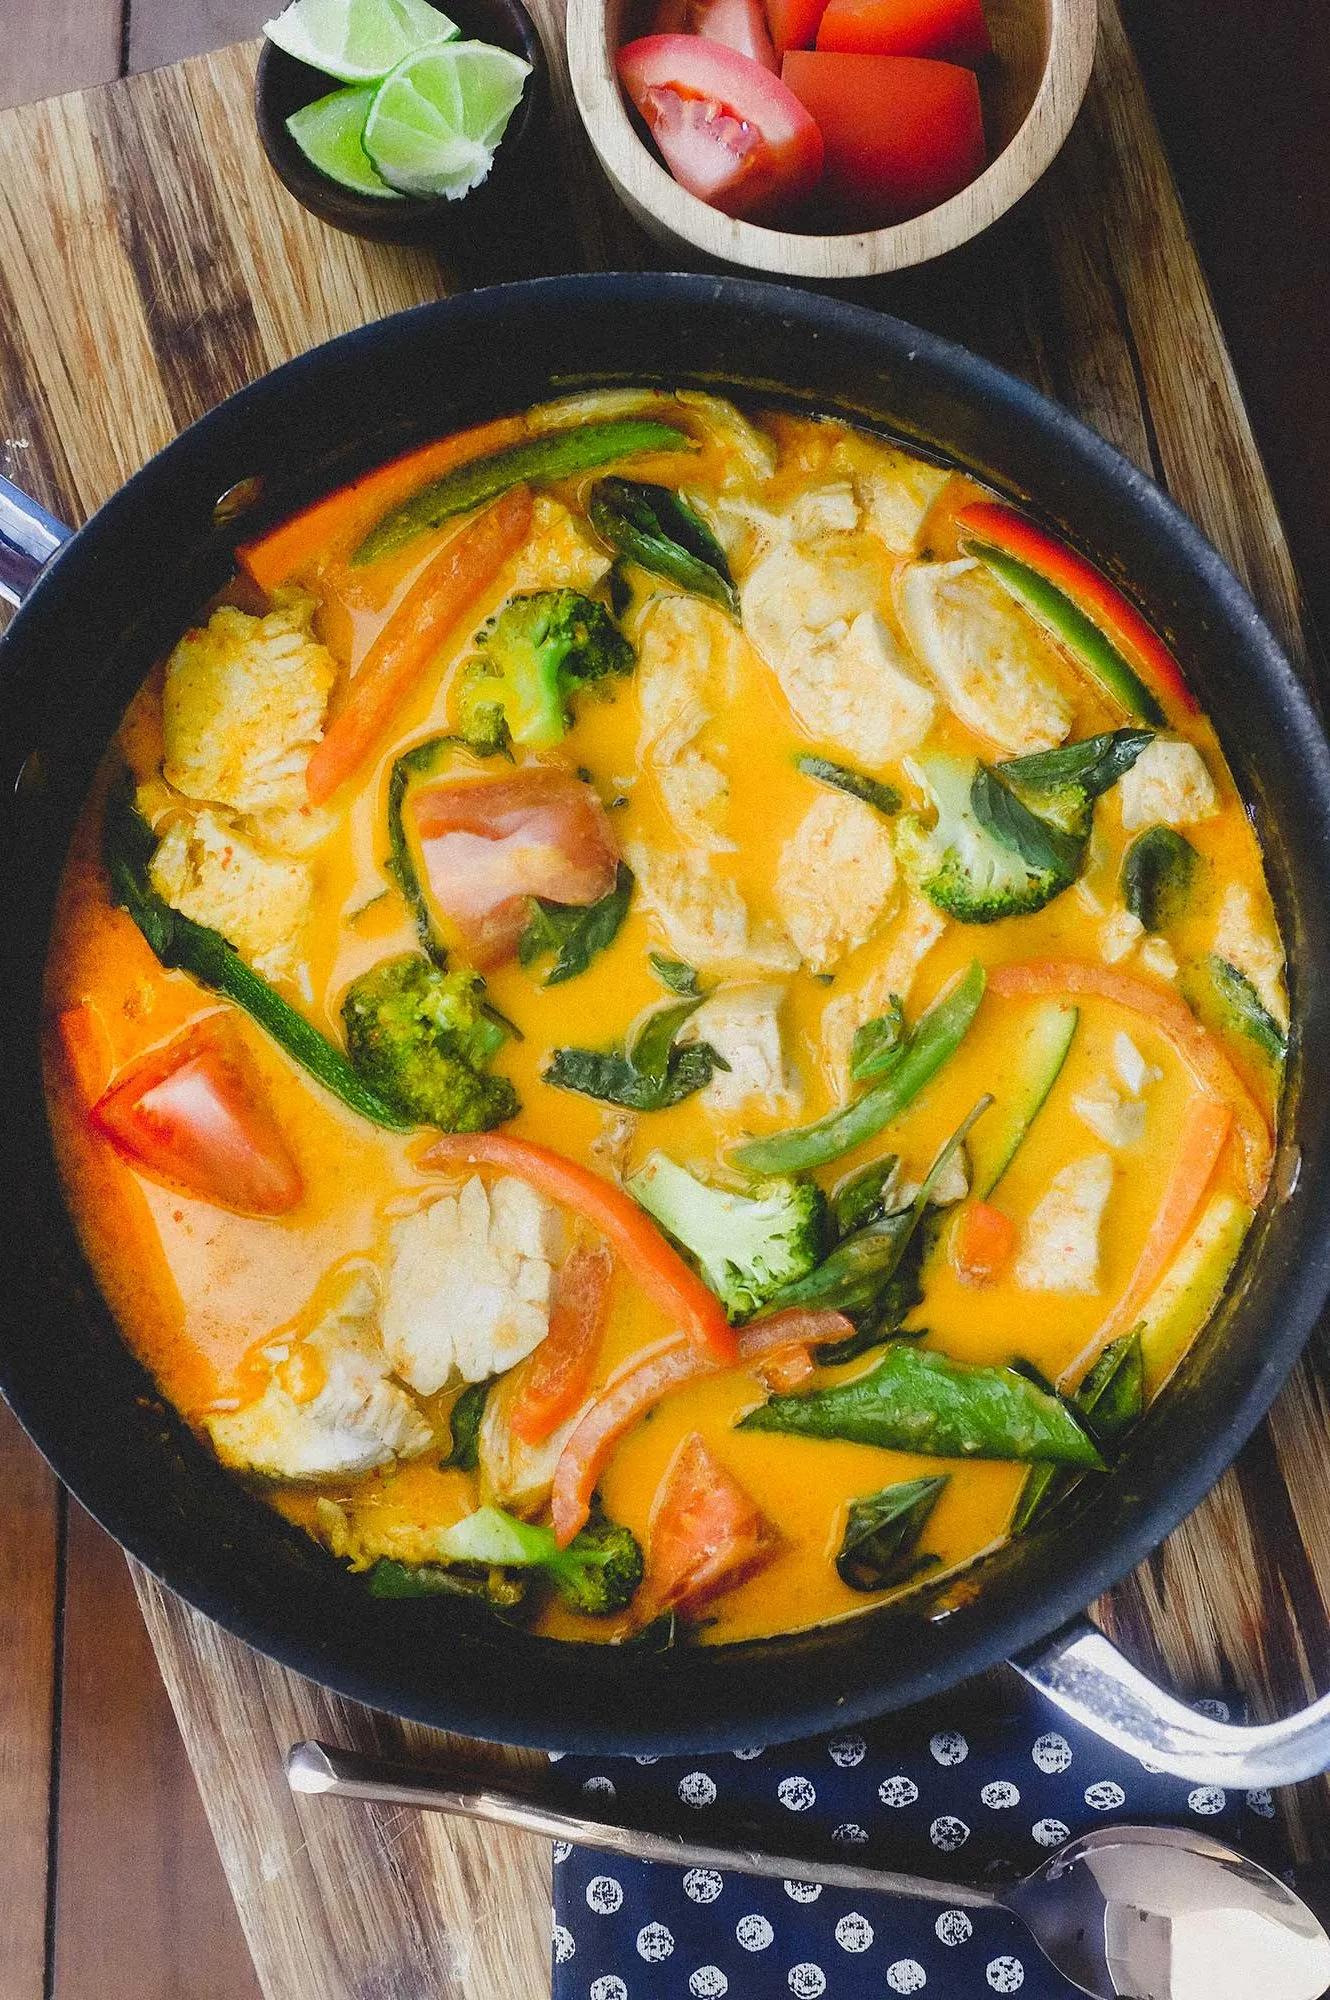 Thai Red Curry Chicken - An authentic Thai recipe from Cook Eat World